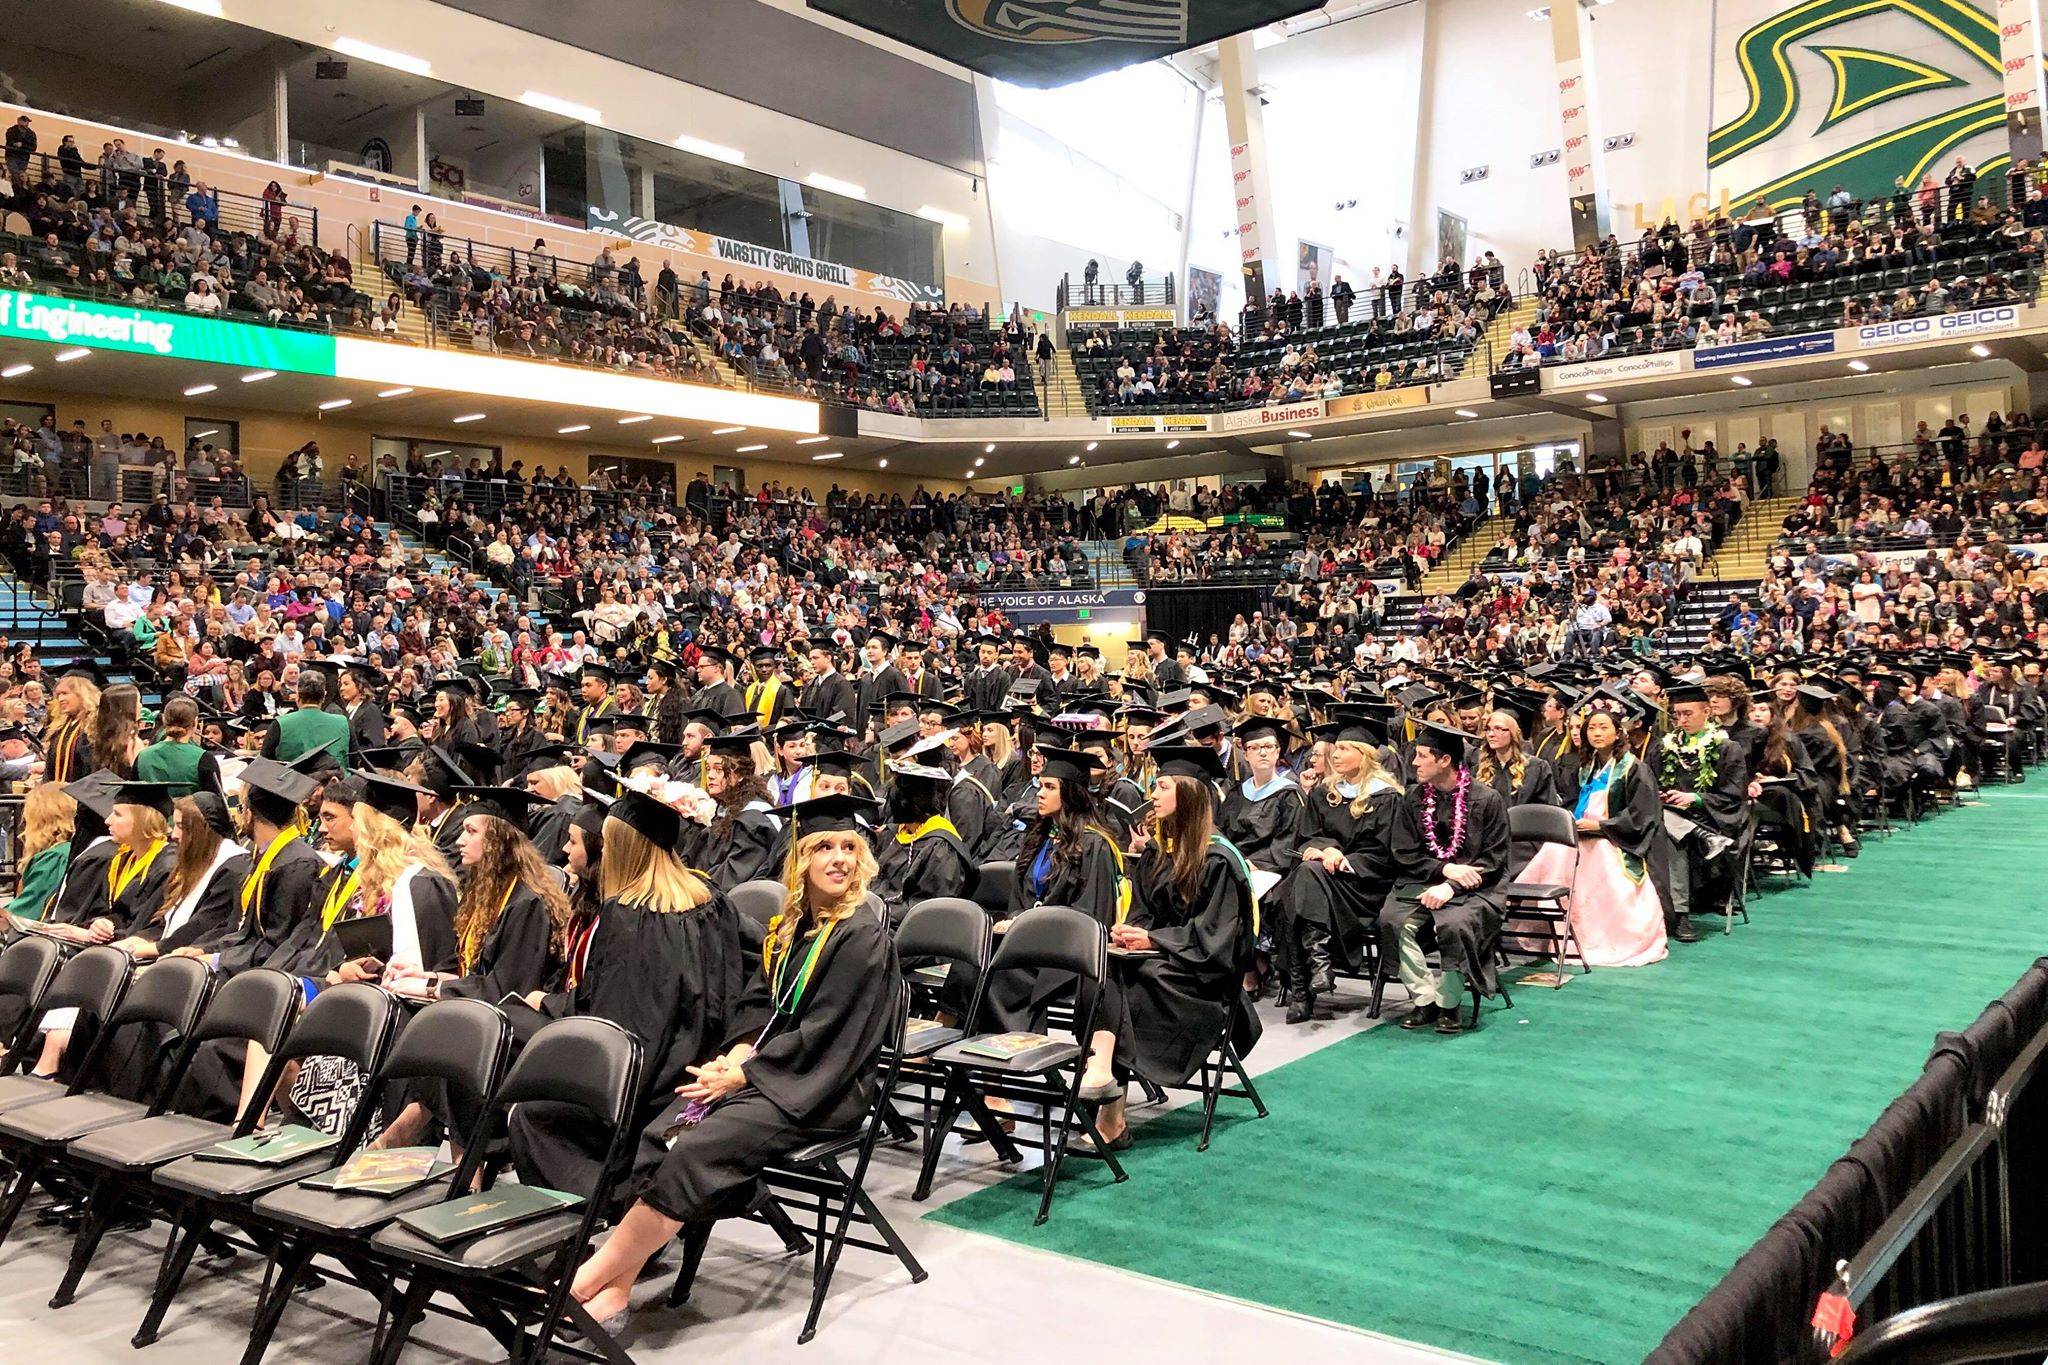 Students wait to graduate at the University of Alaska Anchorage’s spring commencenet ceremony on Sunday, May 5, 2019, in Anchorage, Alaska. (Photo by Victoria Petersen/Peninsula Clarion)